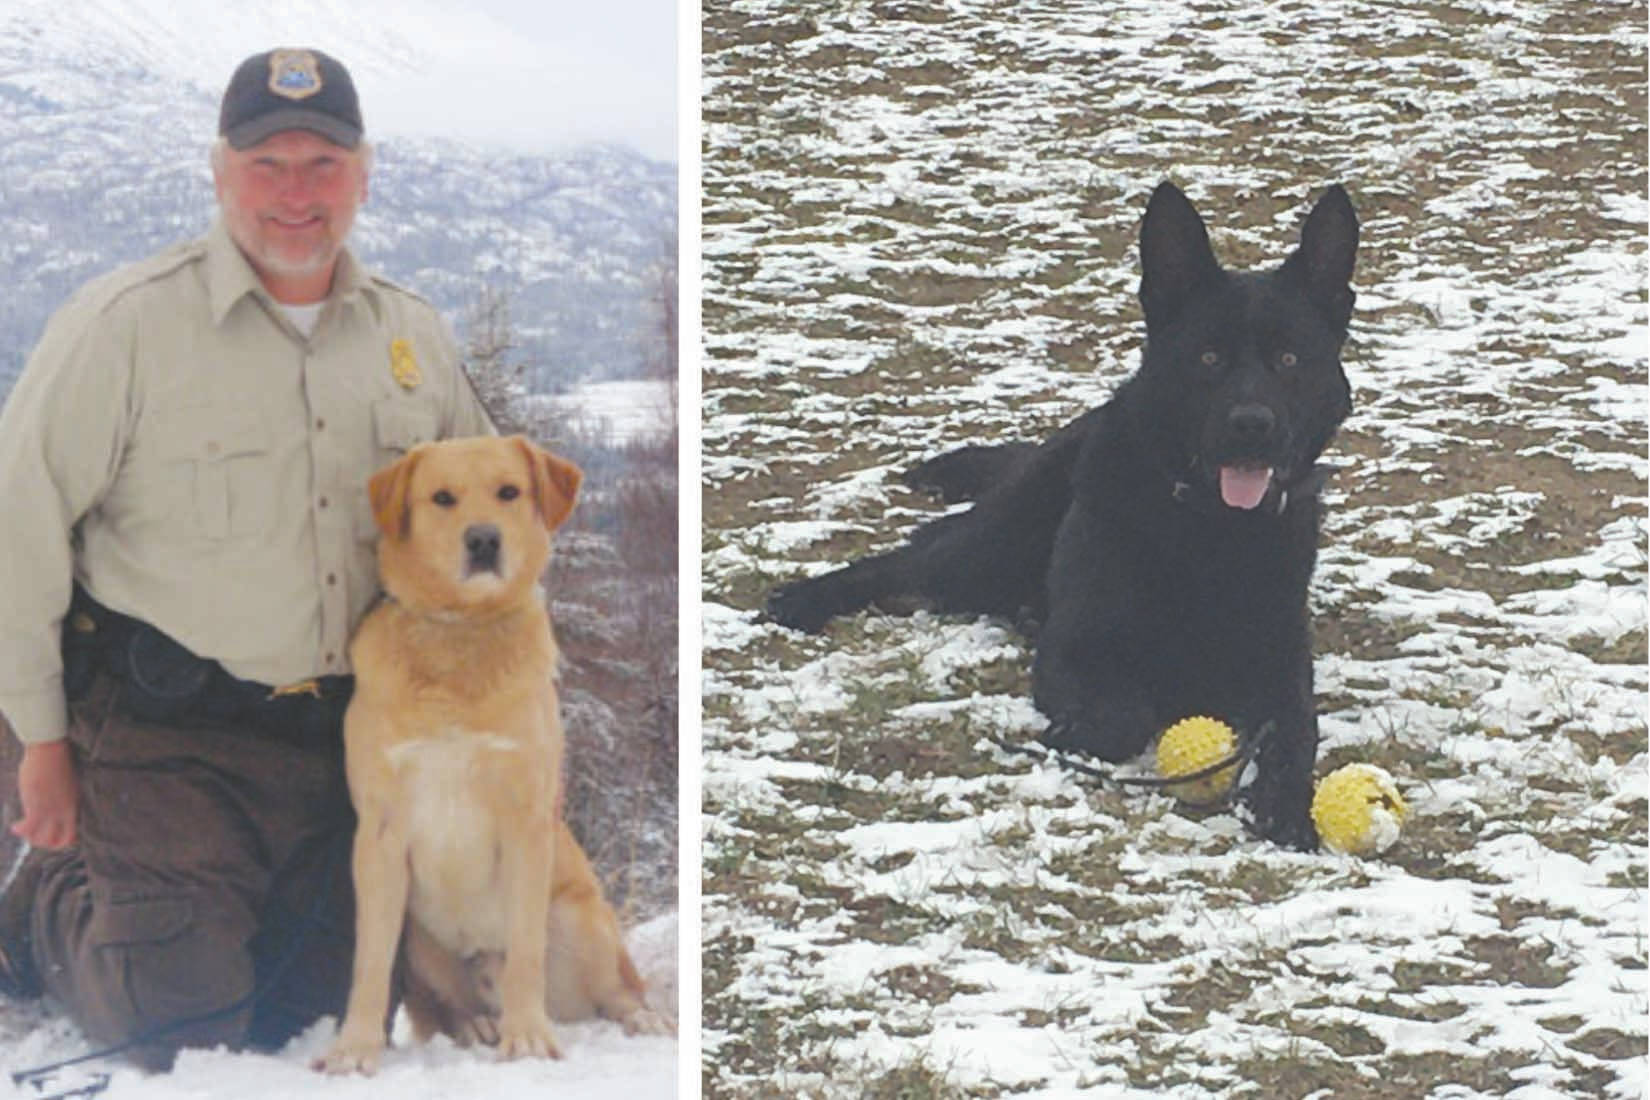 Former Refuge K9 Officer Rex will enjoy retirement as newcomer formerly known as Thomi takes up the job. (Photo by Rob Barto/USFWS)